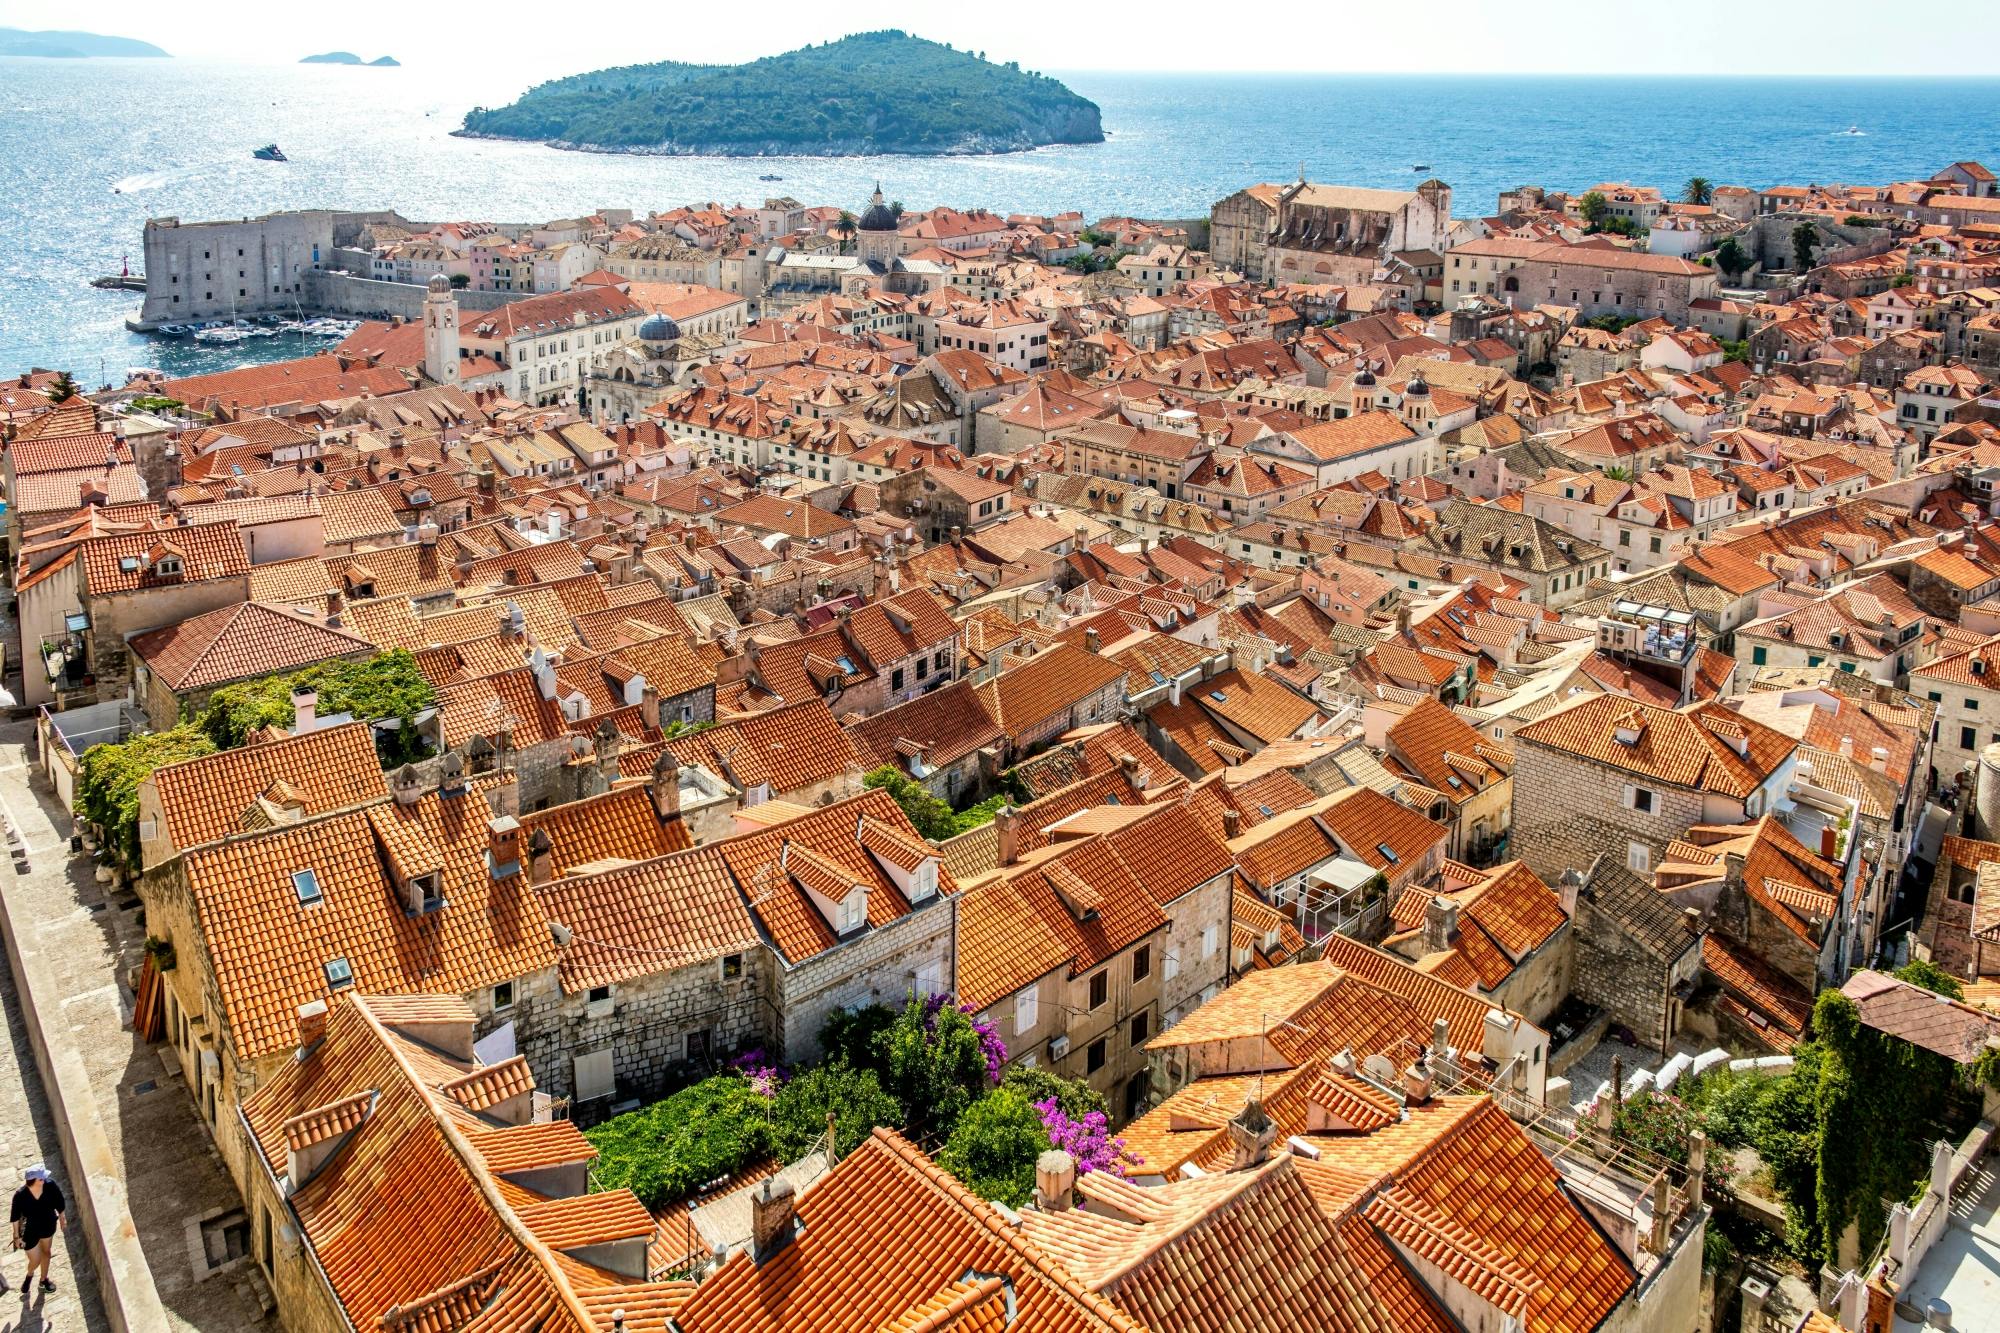 Game of Thrones King's Landing Filming Locations Tour